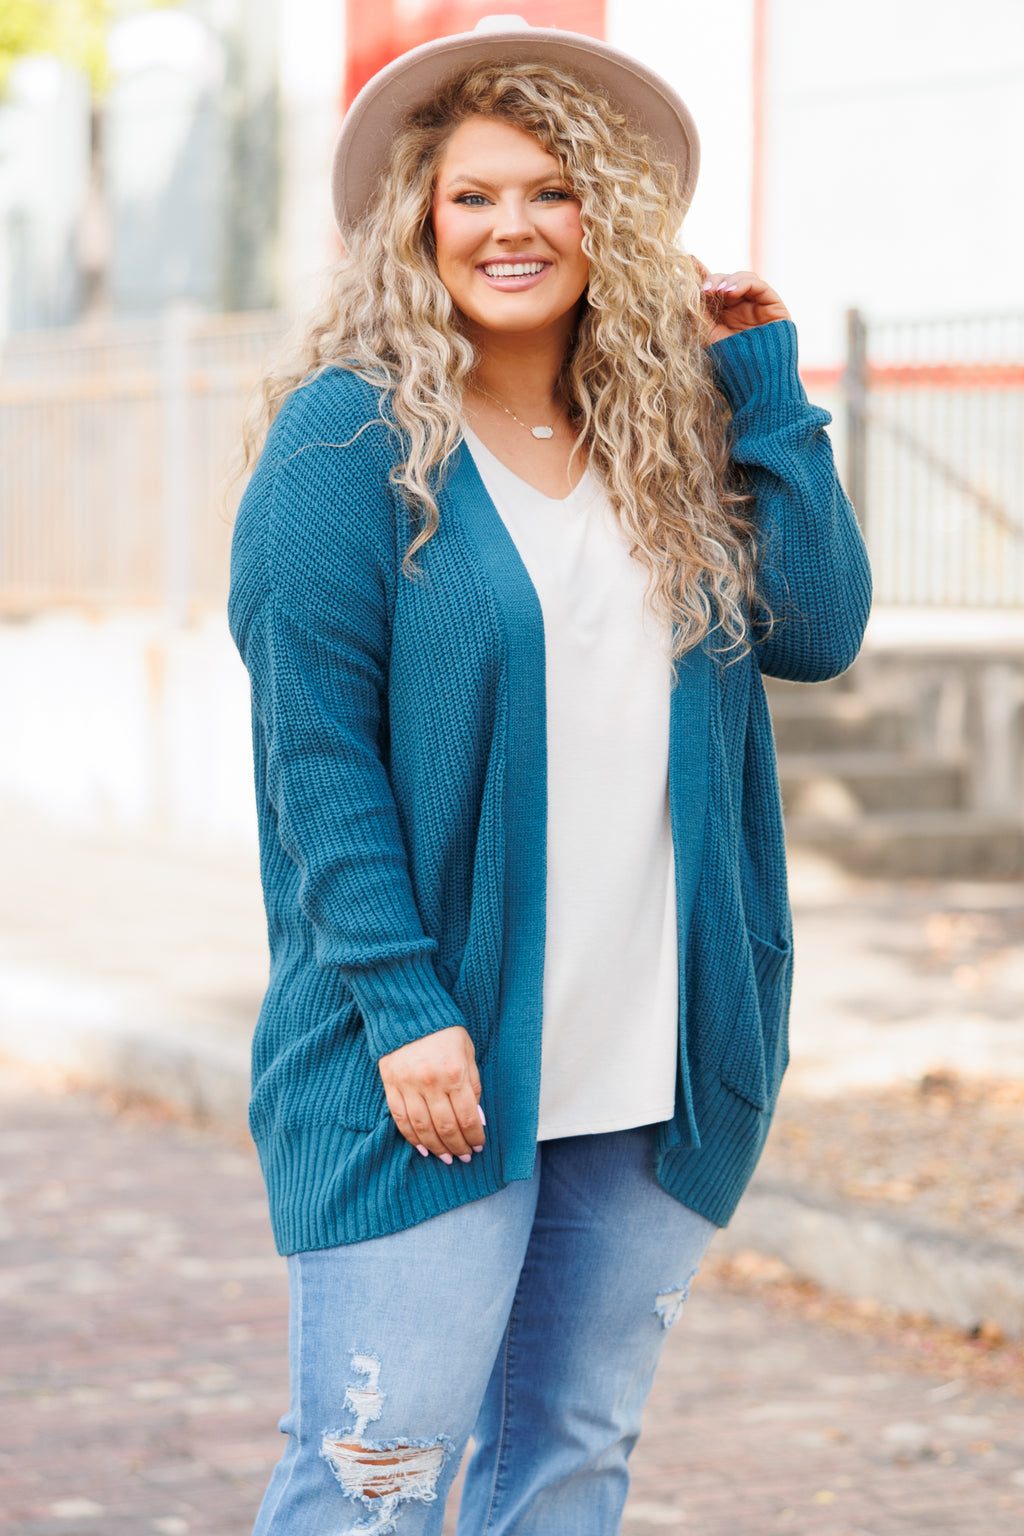 Træ pad Undertrykkelse Brighter Than The Moon Cardigan, Teal – Chic Soul